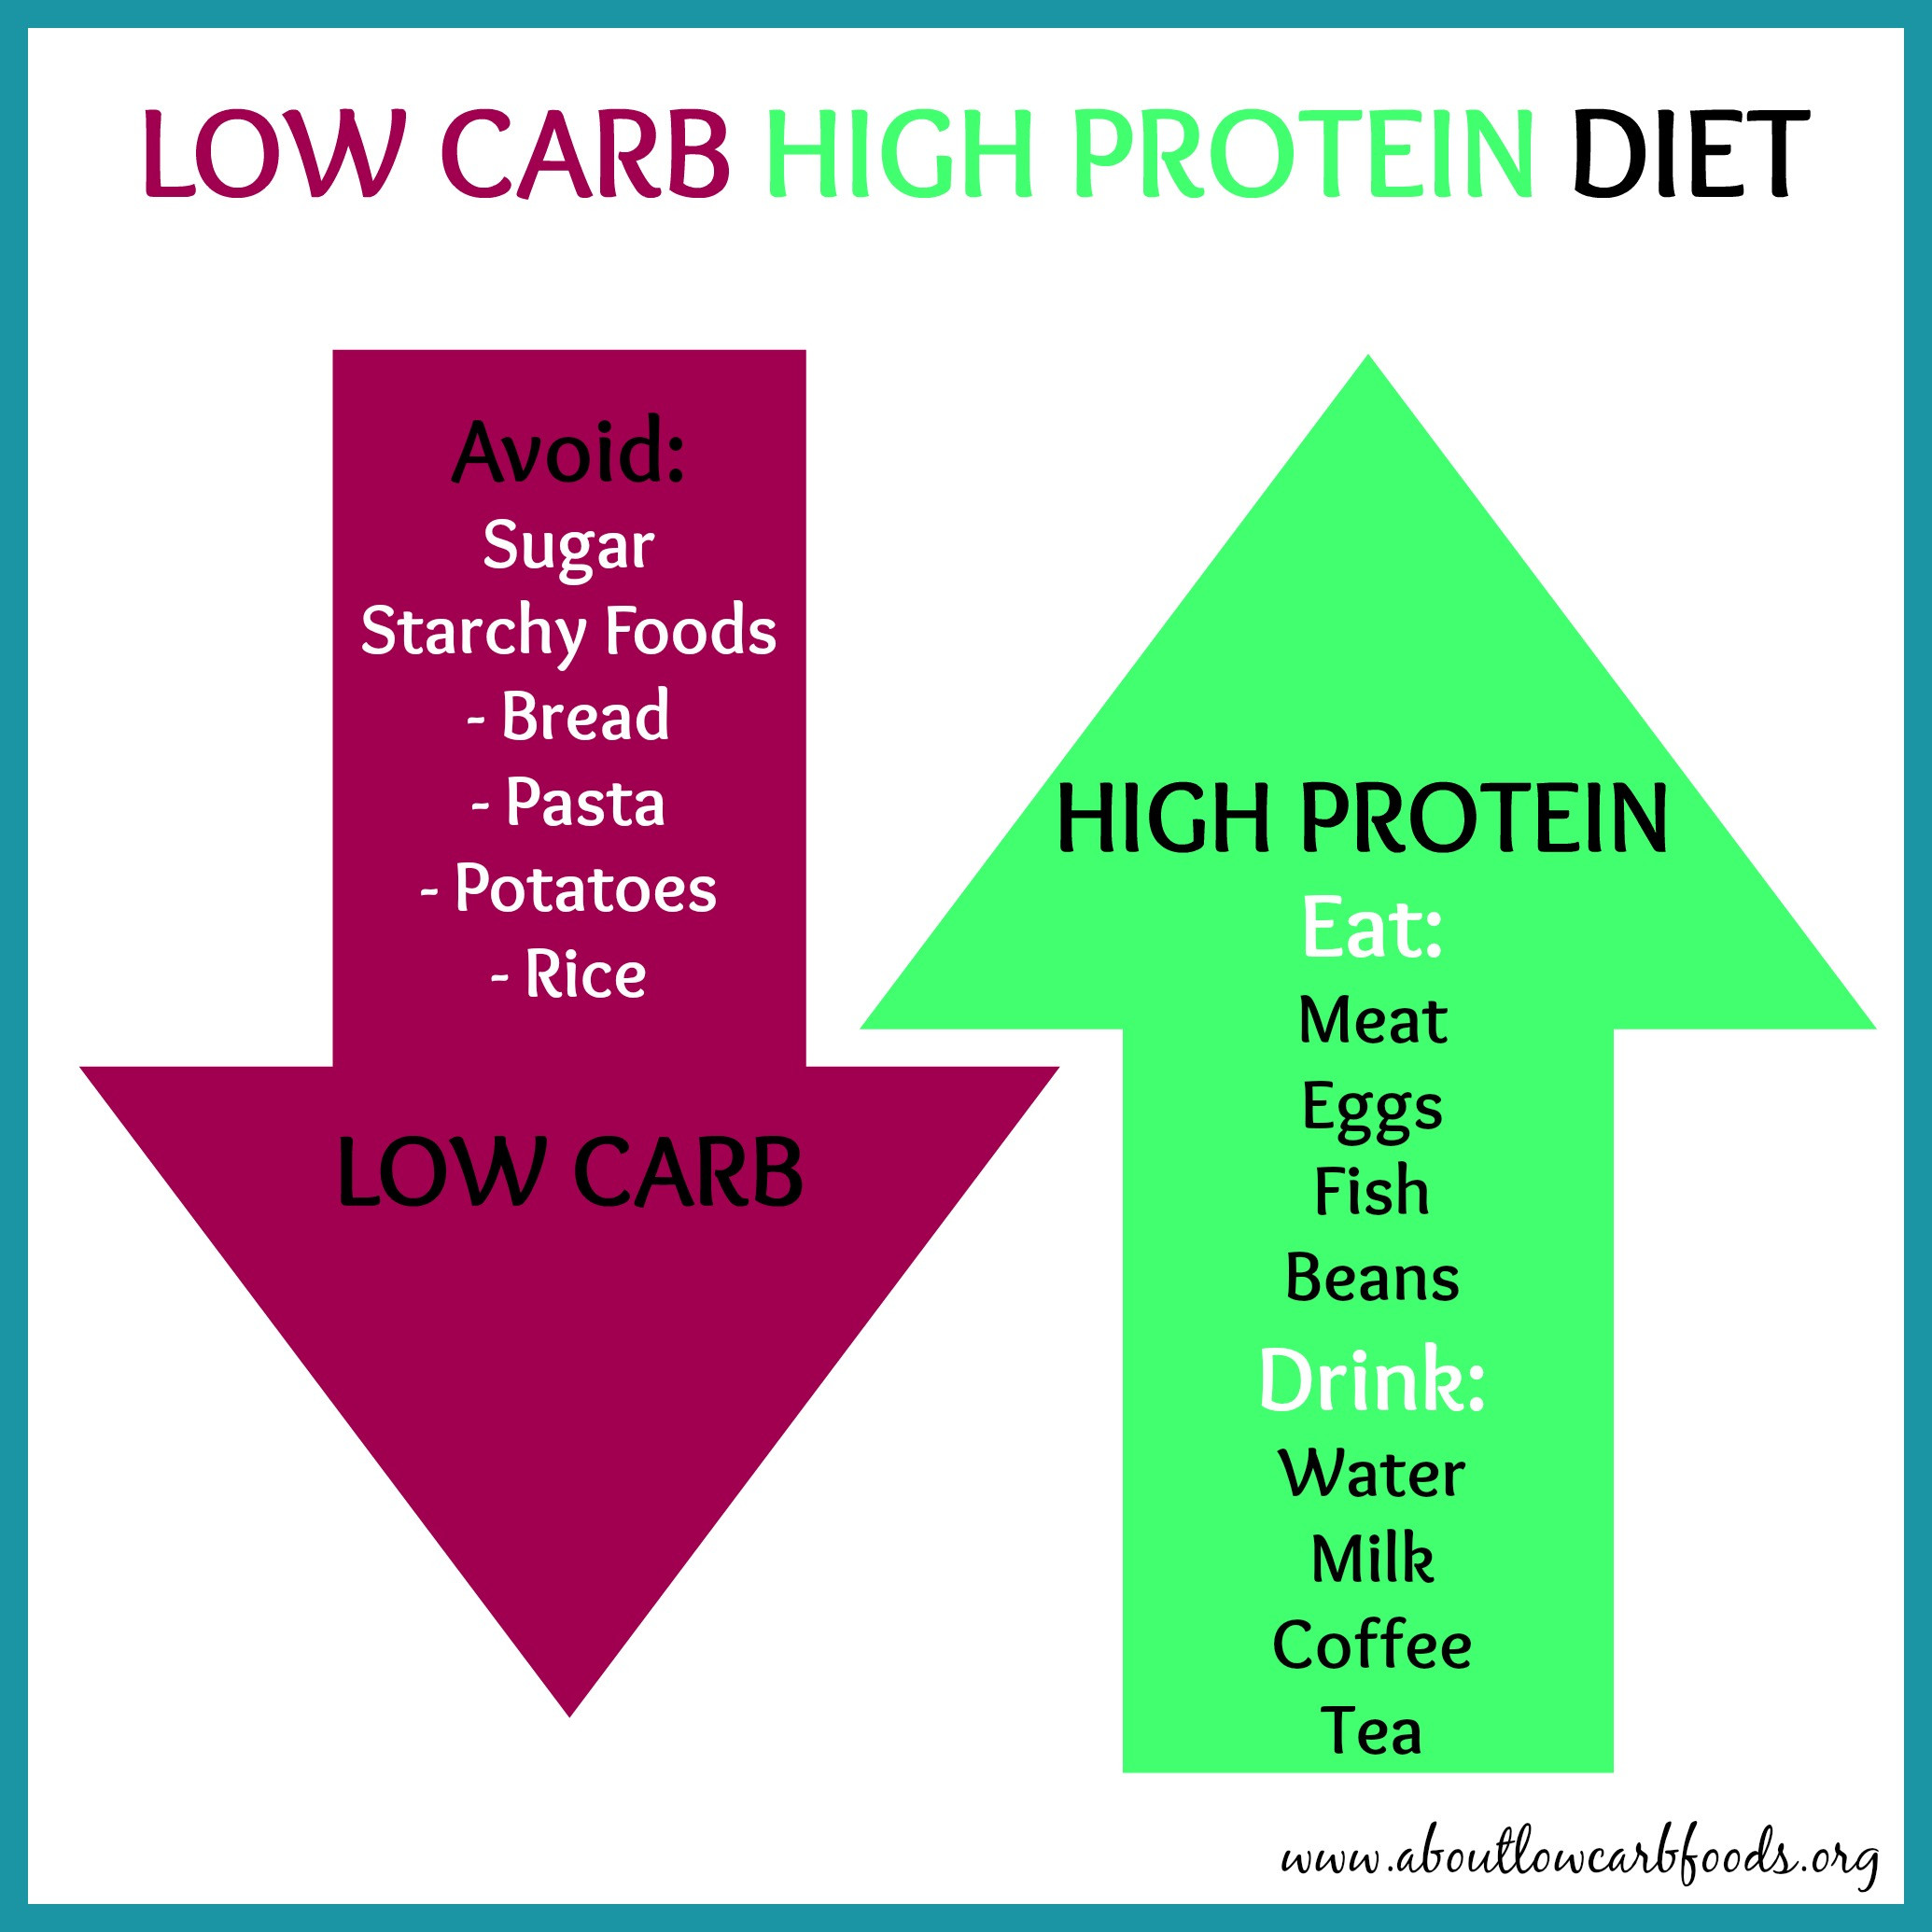 High Protein Low Carbohydrate Diet
 Are Low Carb Diets worse than High Carb Diets